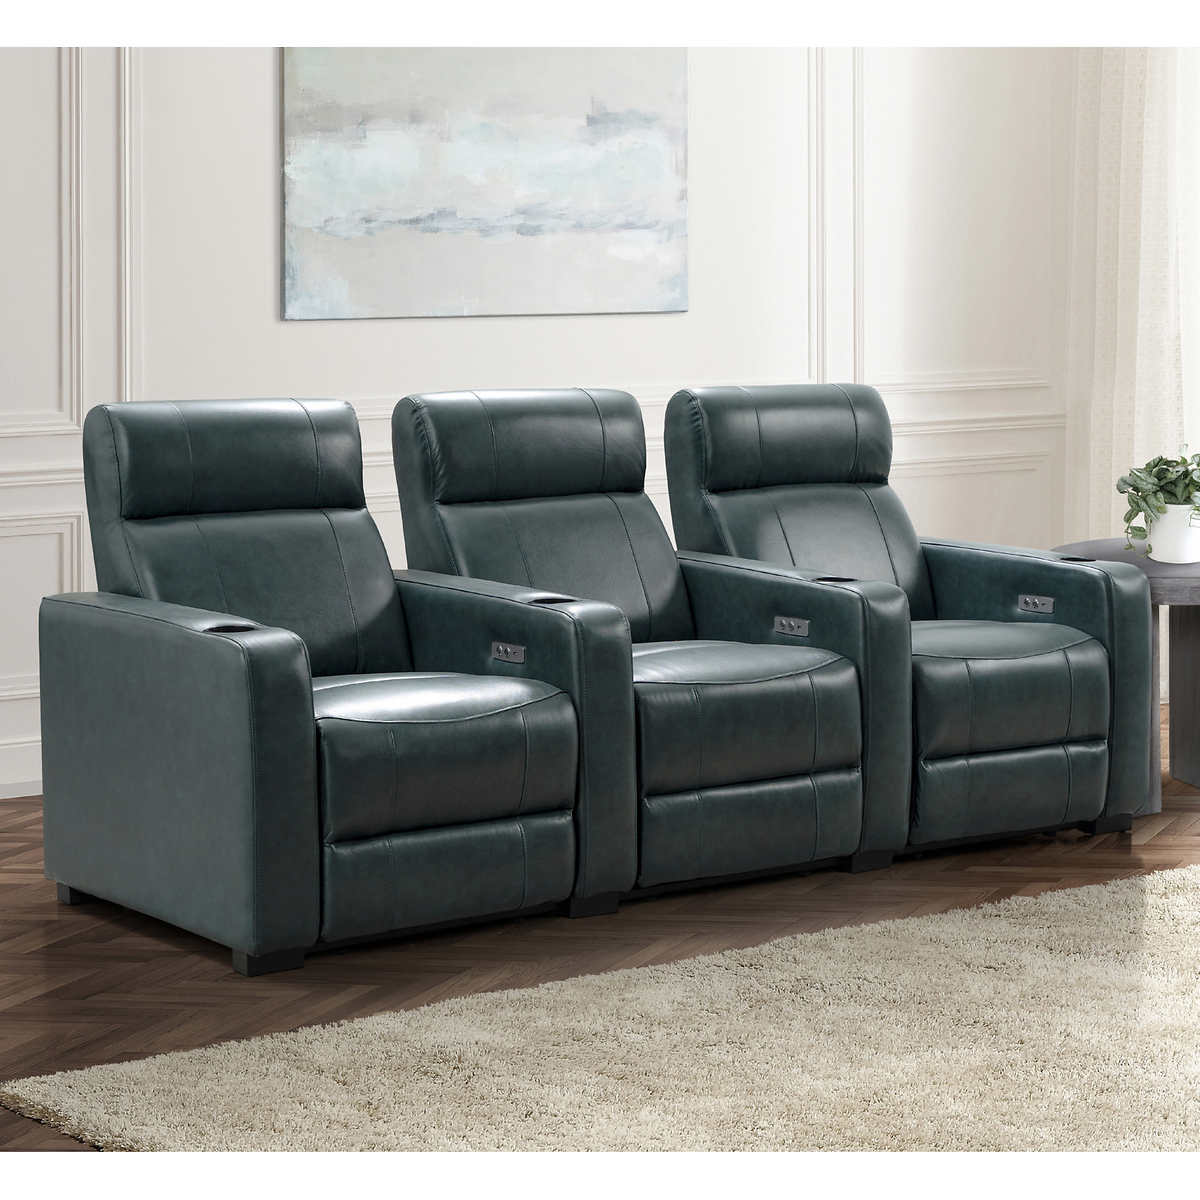 Costco Home Theater Seating / The companies have partnered to deliver